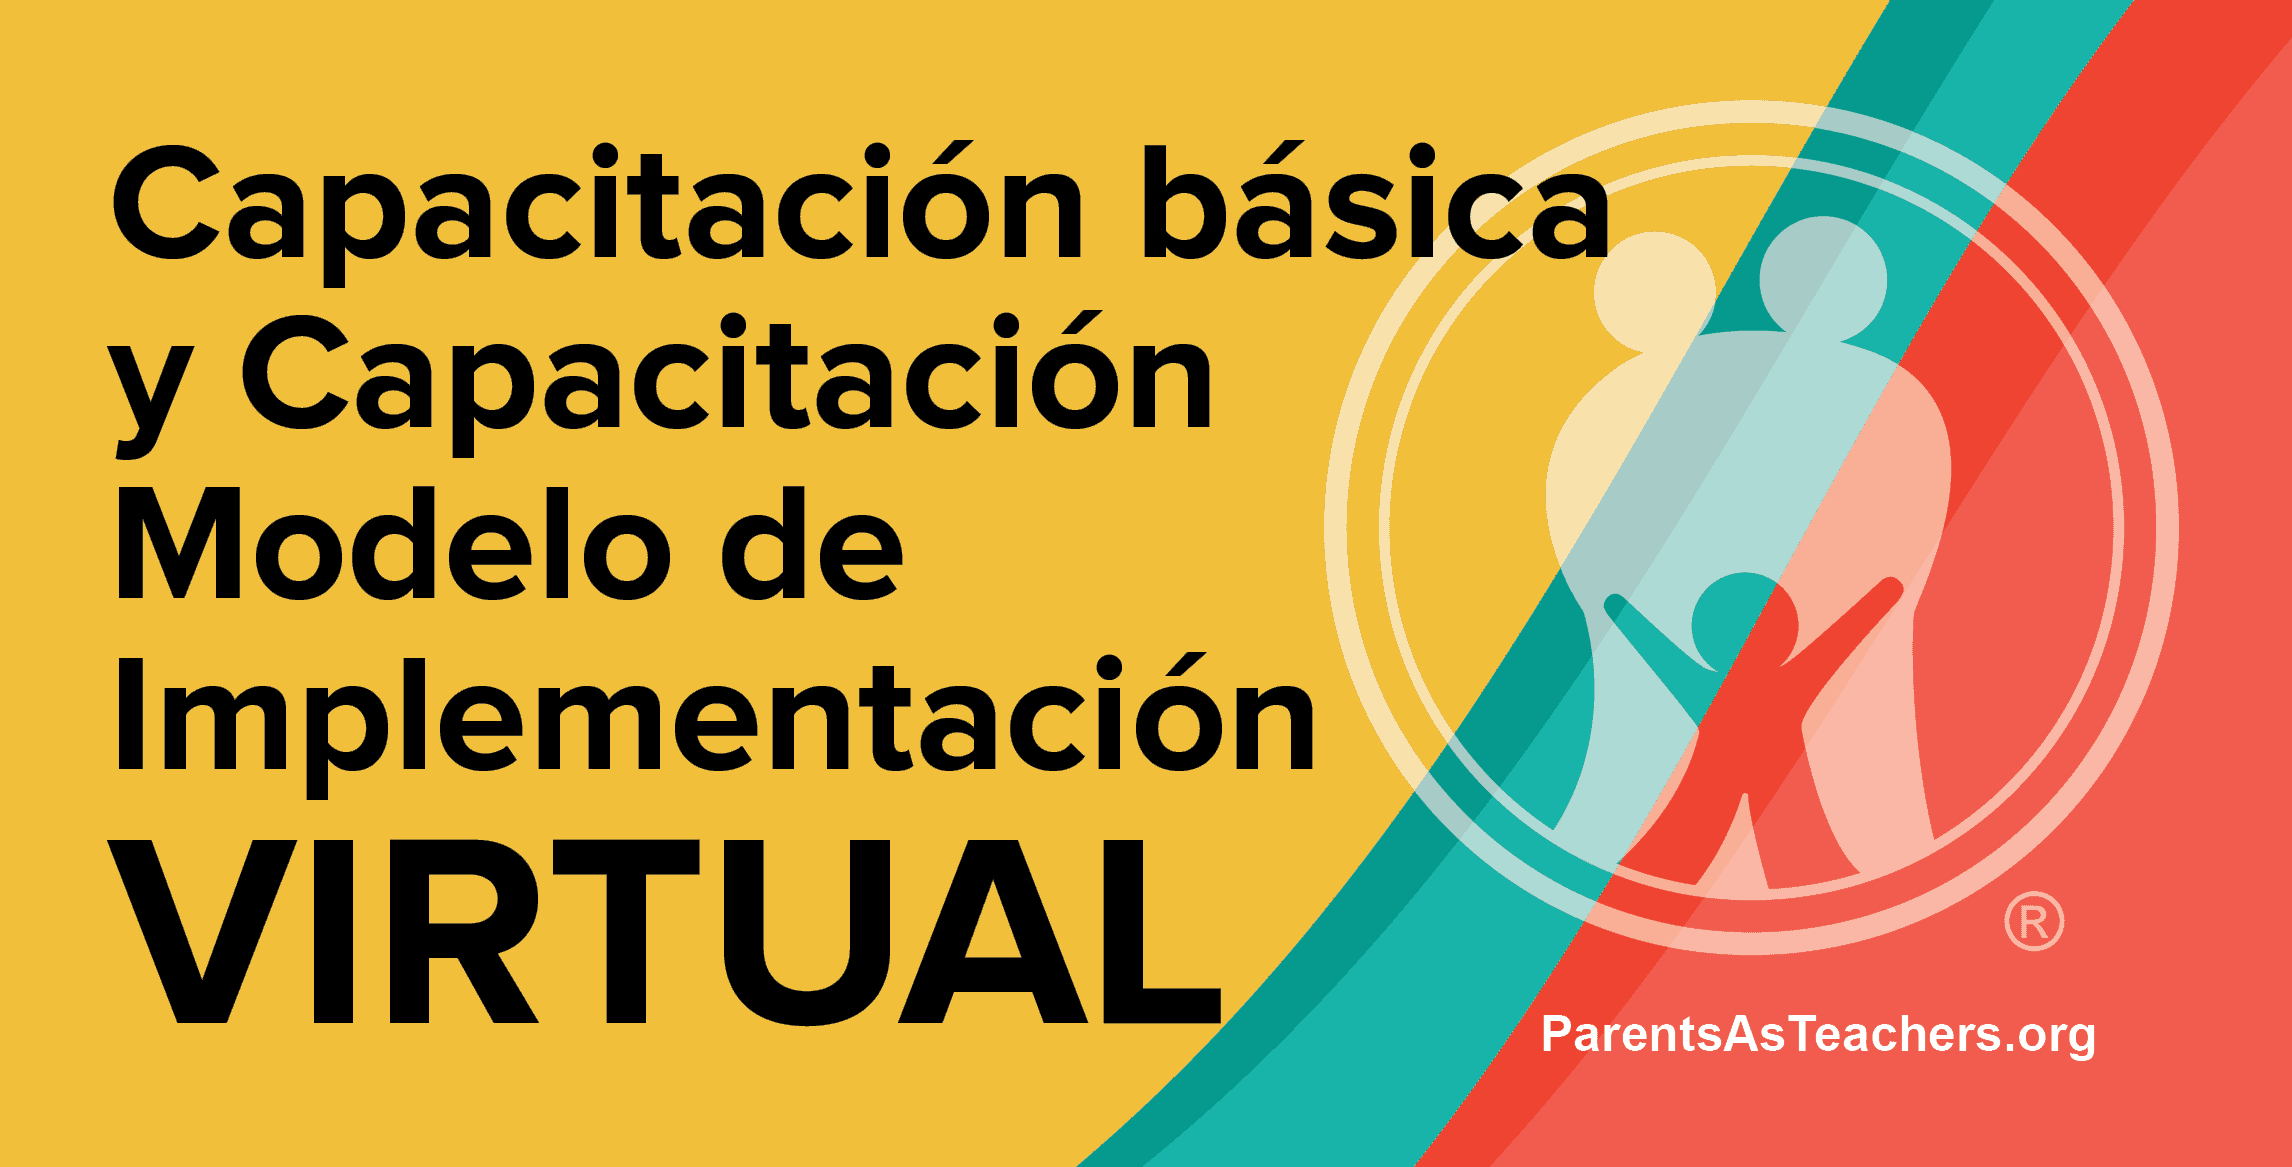 Announcing virtual Foundational and Model Implementation trainings in Spanish